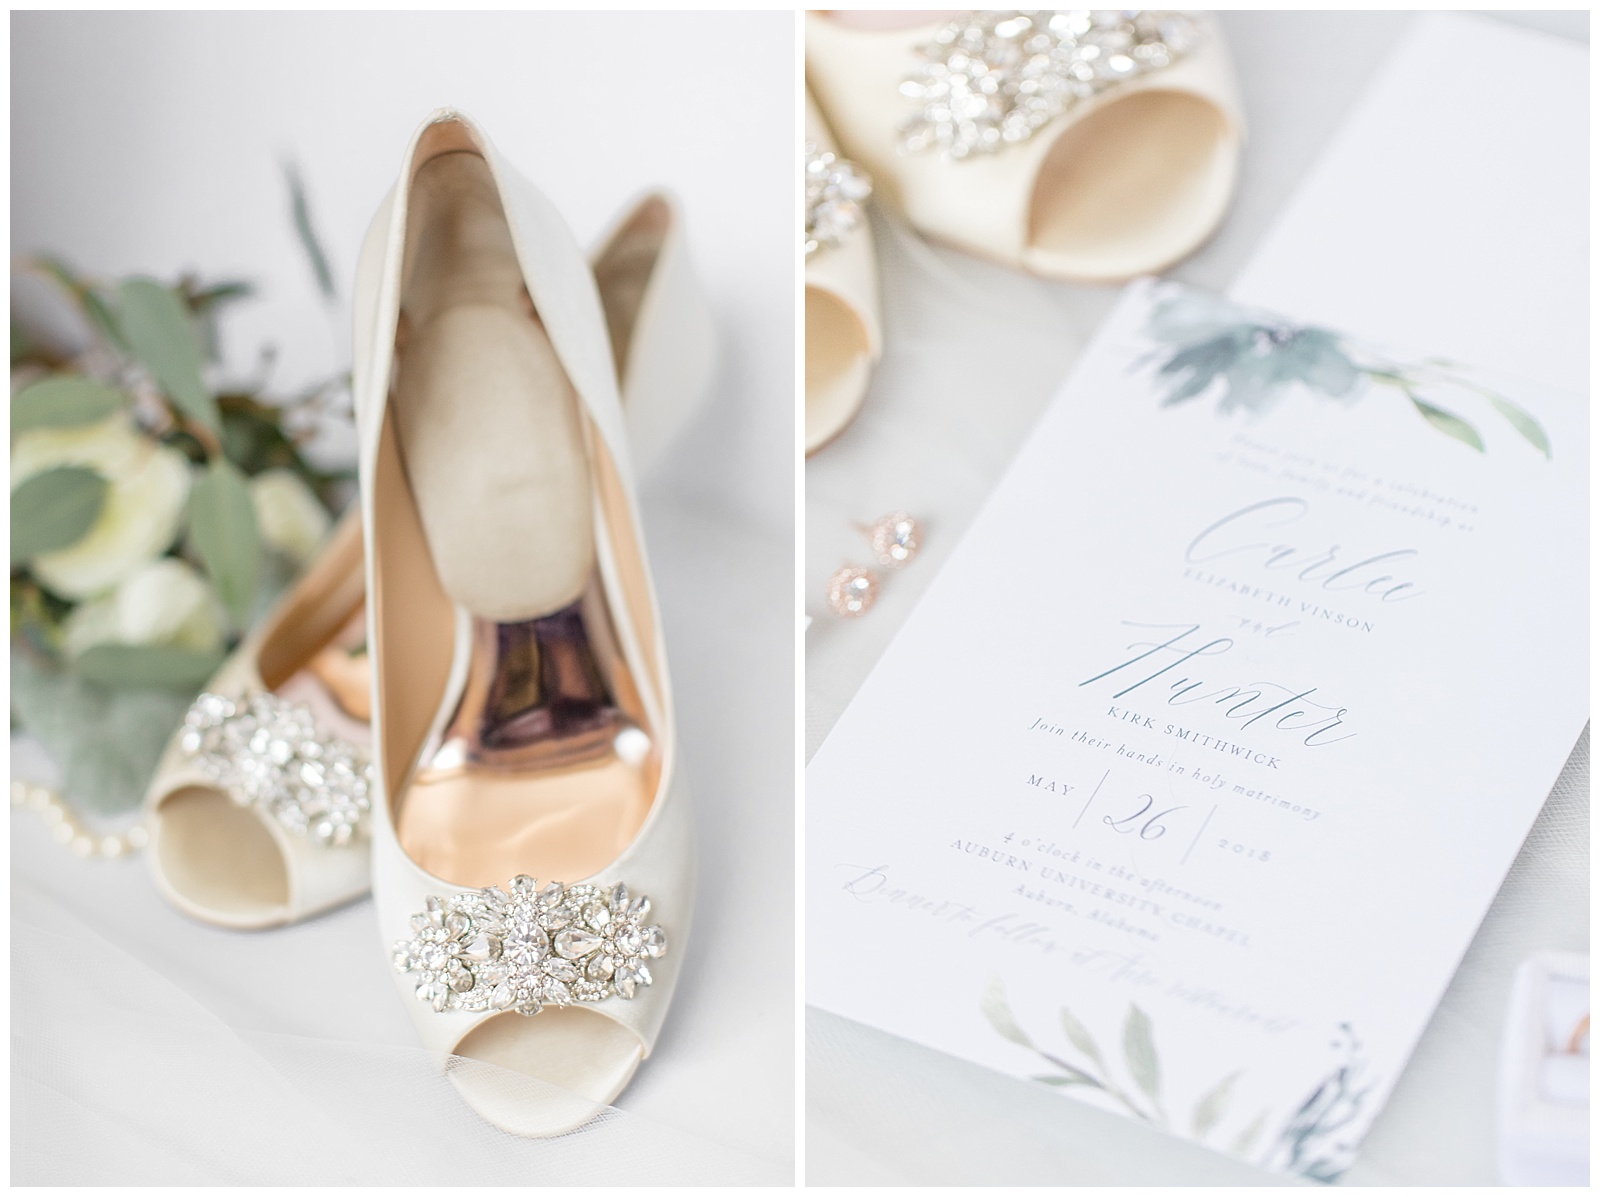 Wedding Photographers in Birmingham, Alabama Katie & Alec Photography - What's In Our Styling Kit